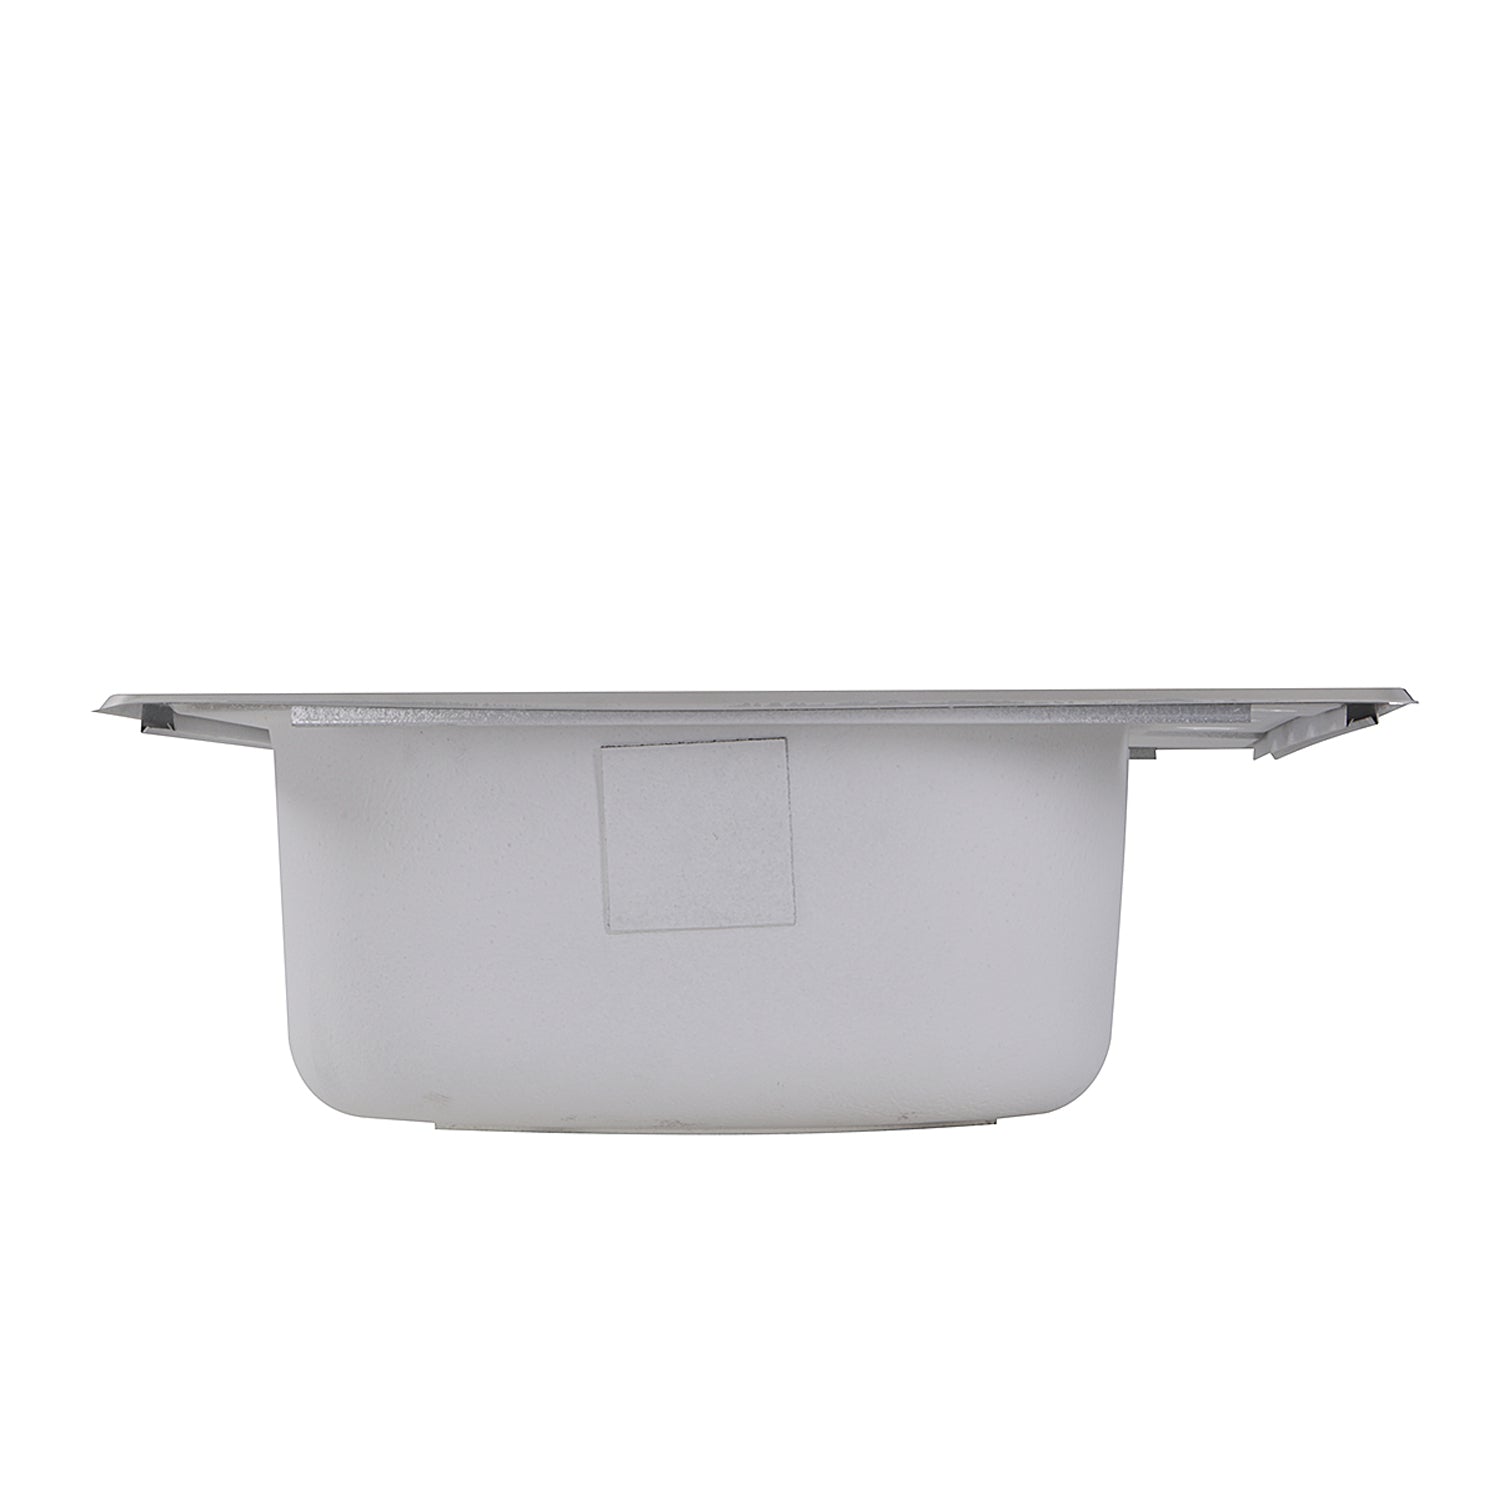 Nantucket Sinks NS2522-8 - 25" Small Rectangle Single Bowl Self Rimming Stainless Steel Drop in Kitchen Sink, 18 Gauge